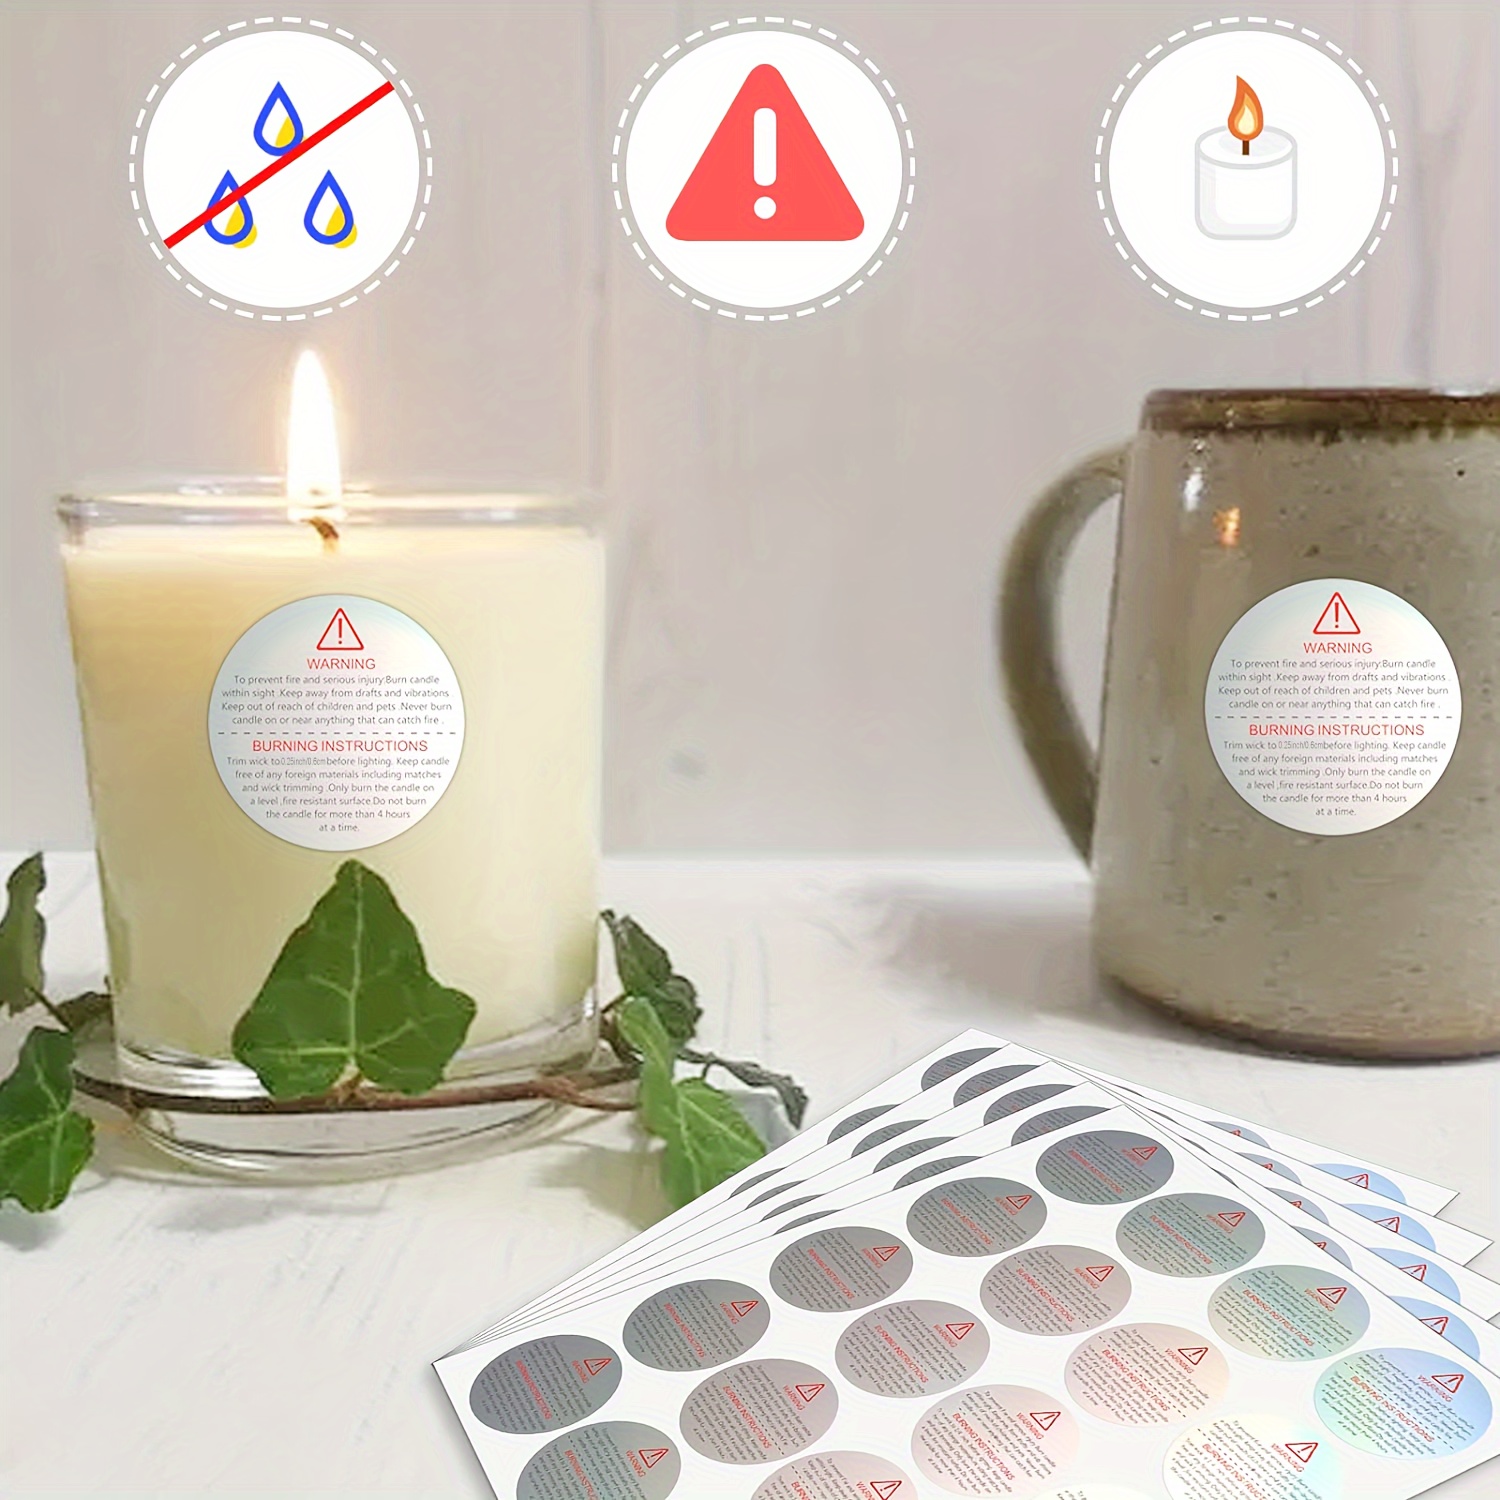 500Pcs Candle Warning Labels 2In, Candle Jar Container Stickers, Candle Wax  for Candle Making Candle Stickers, Waterproof Wax Melting Candle Safety